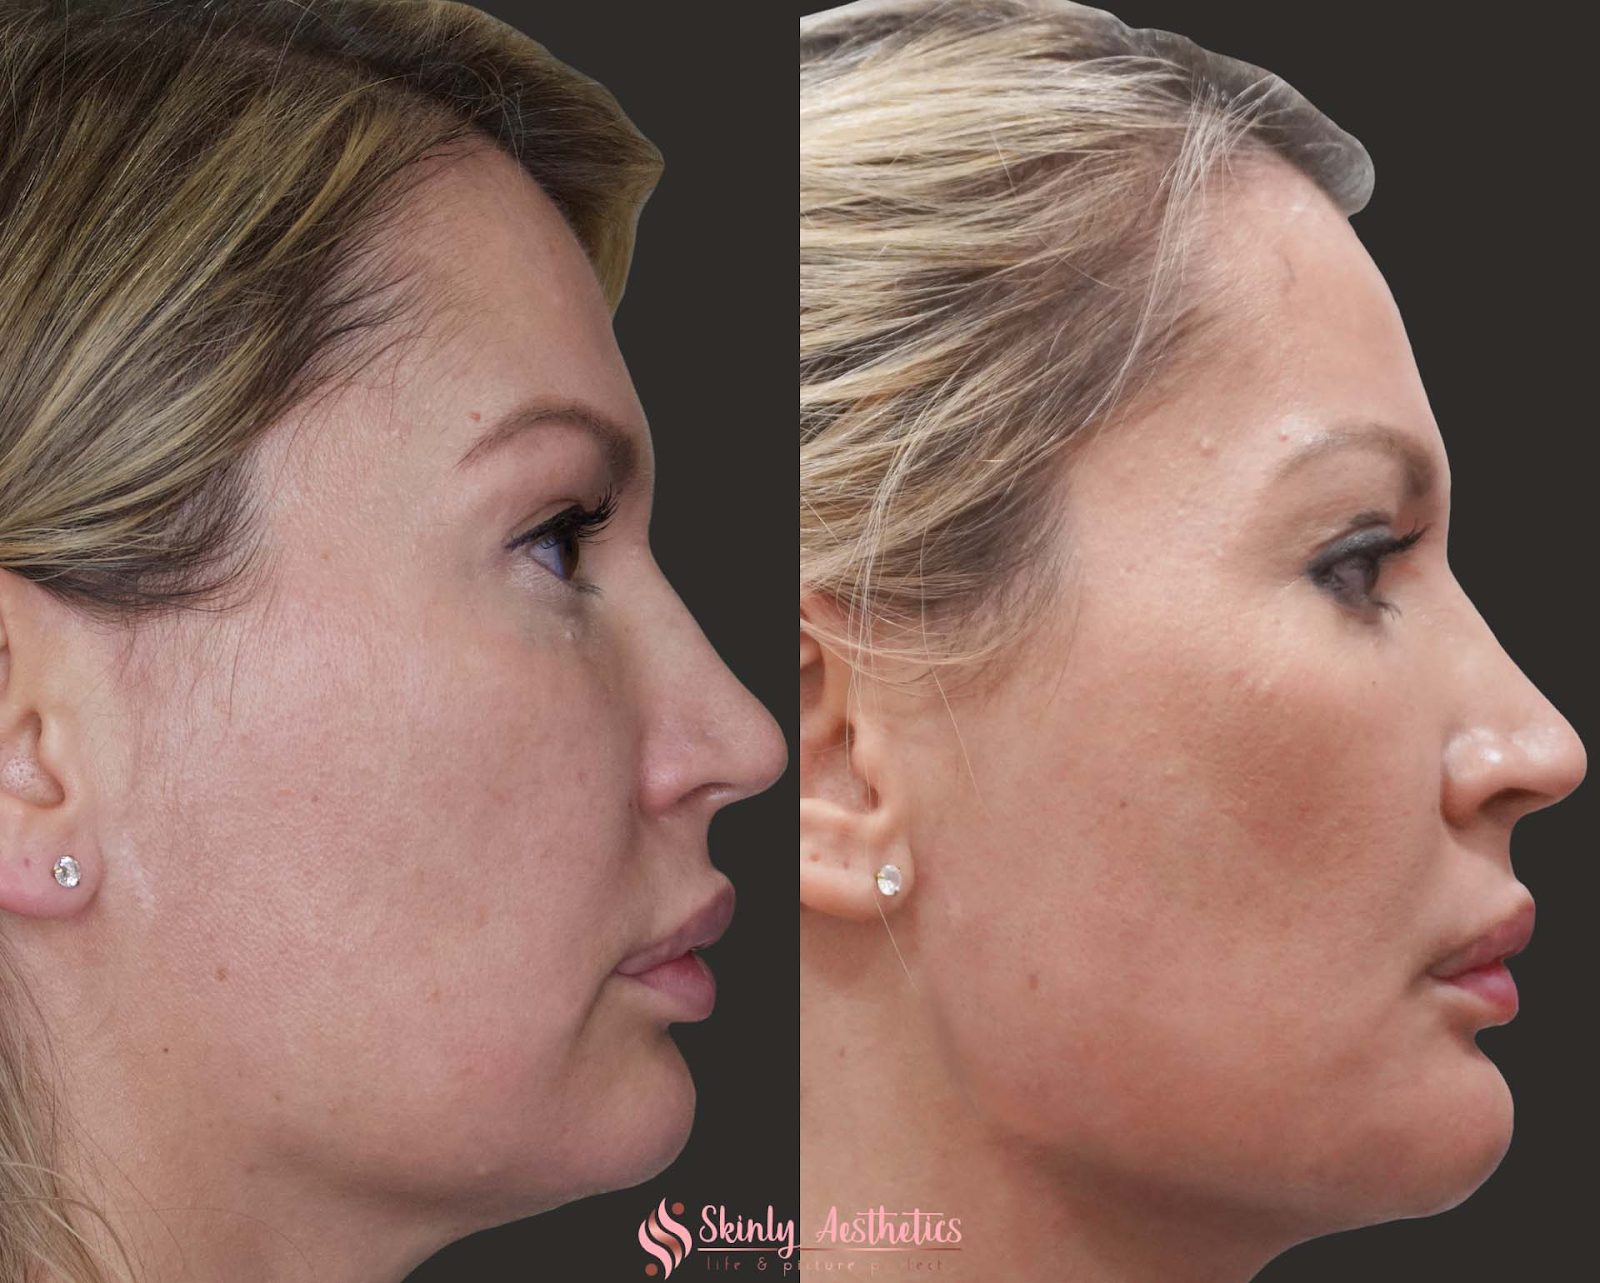 Before and after using Radiesse to define the jawline.